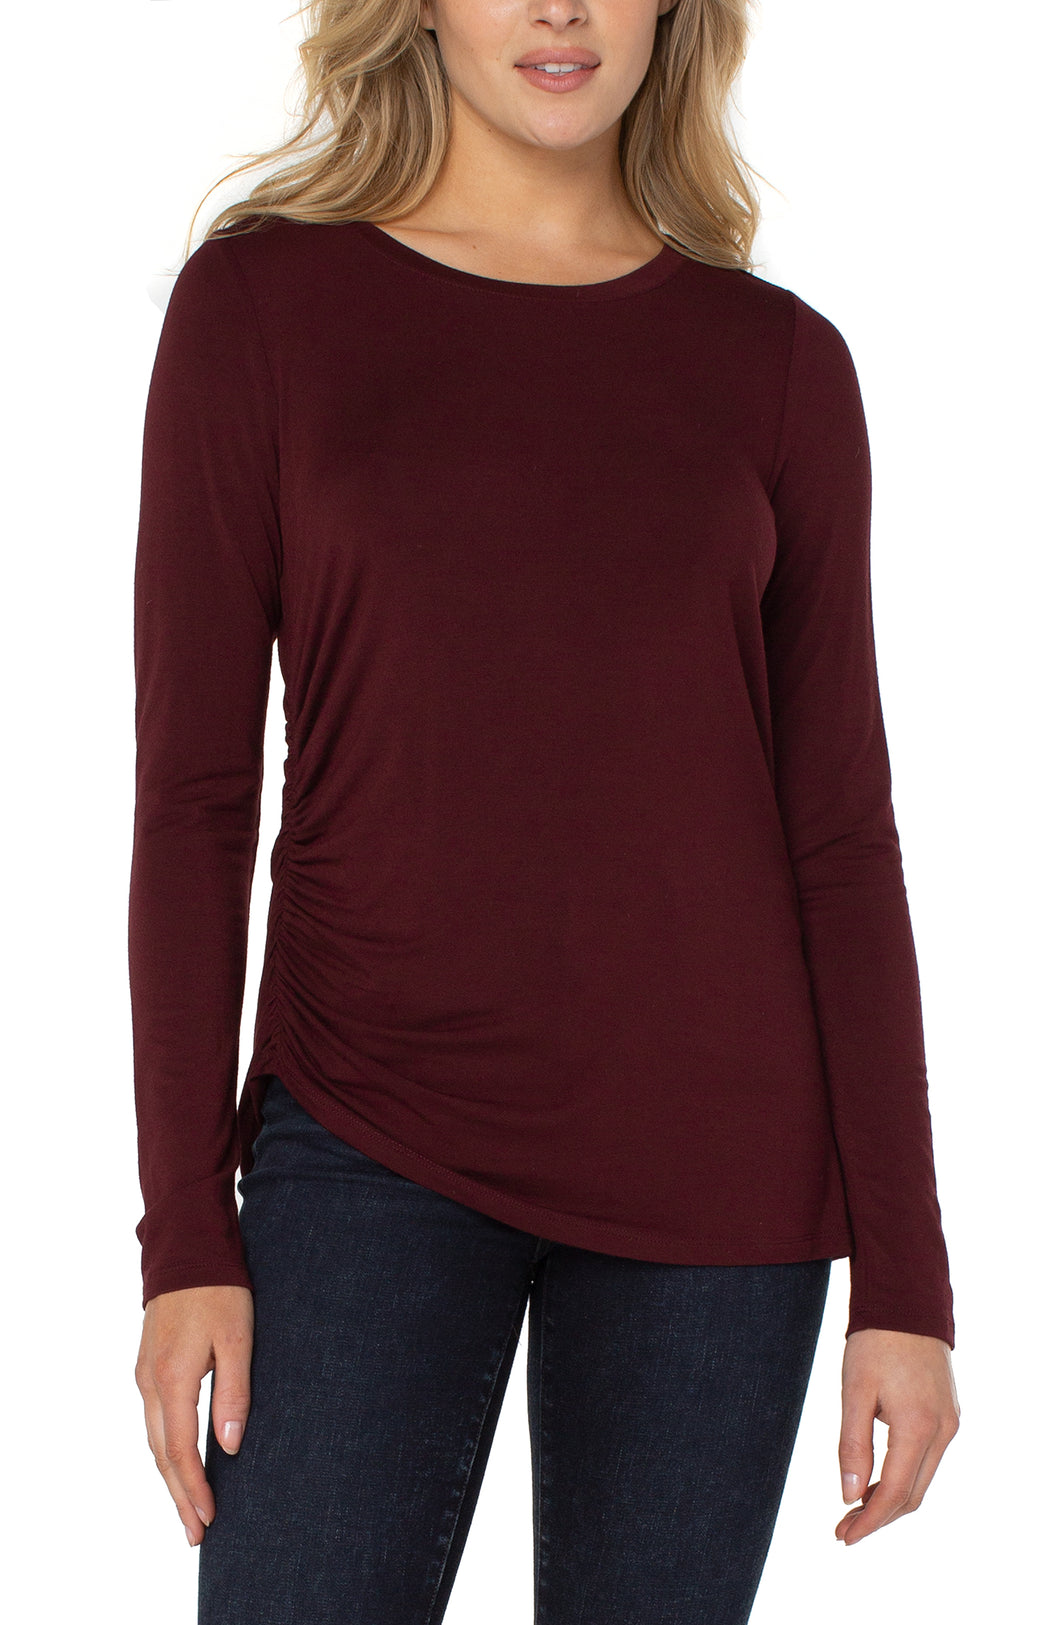 This long sleeve modal knit top features side shirring for a truly flattering fit. This perfect stretch top is easy enough to wear alone or style under your favorite jacket or cardigan.  